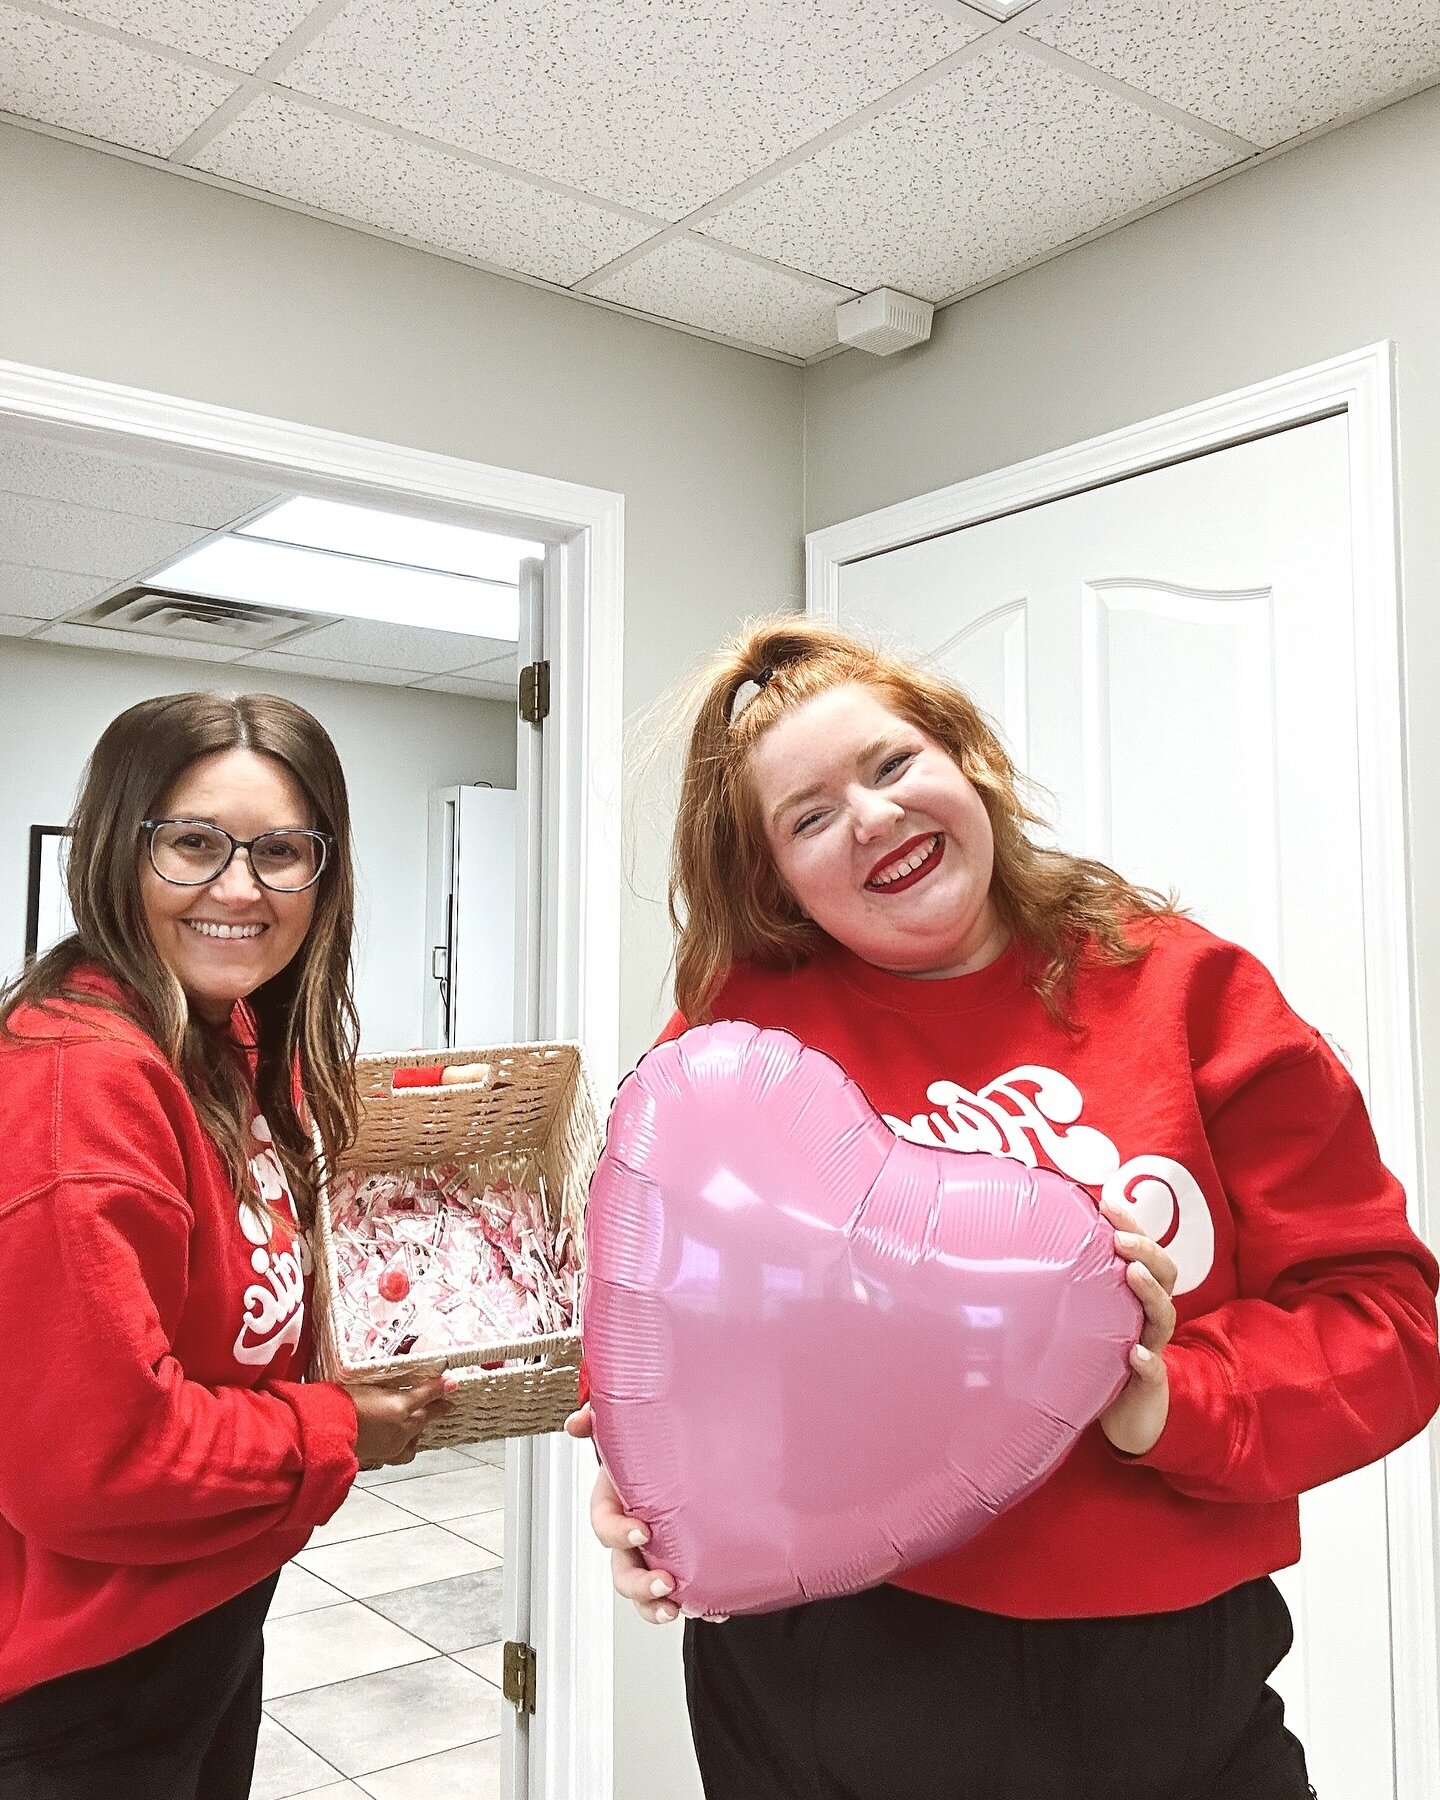 Happy ValenSPINE&rsquo;s Day NEA!💕
We&rsquo;re so excited to treat our sweethearts from 2-6 today with an extra special treat after!